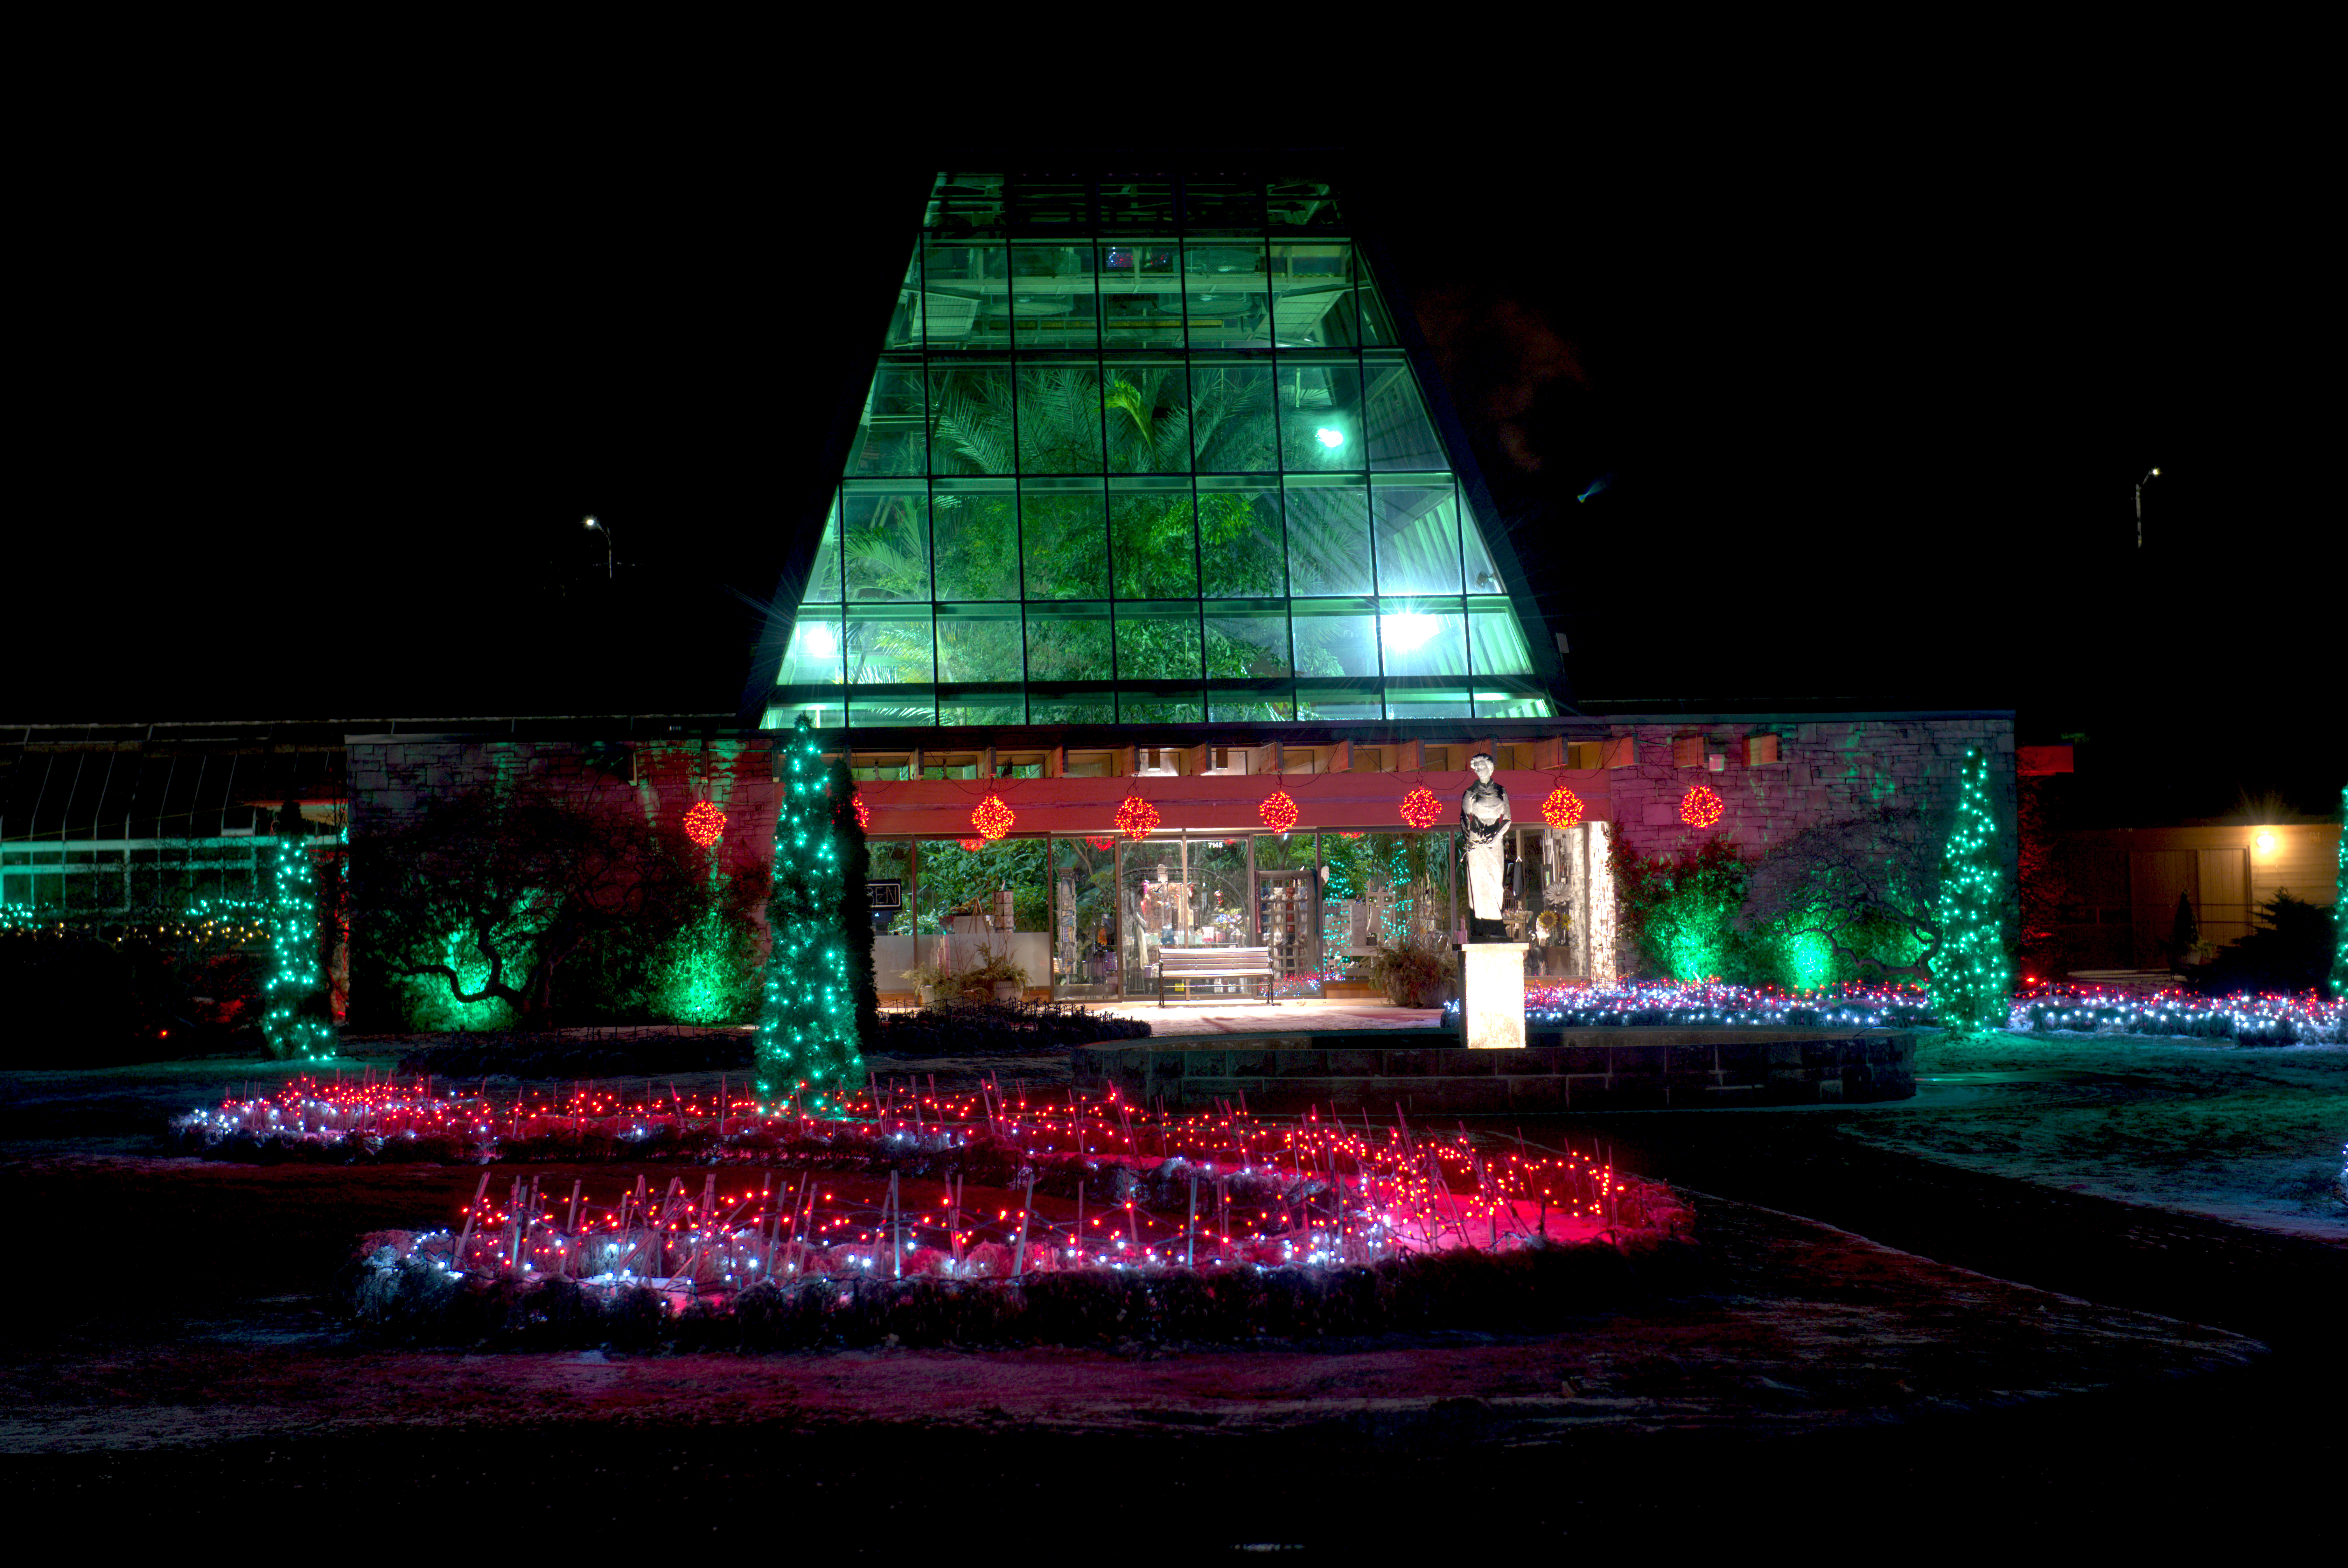 Night Lighting at the Floral Showhouse